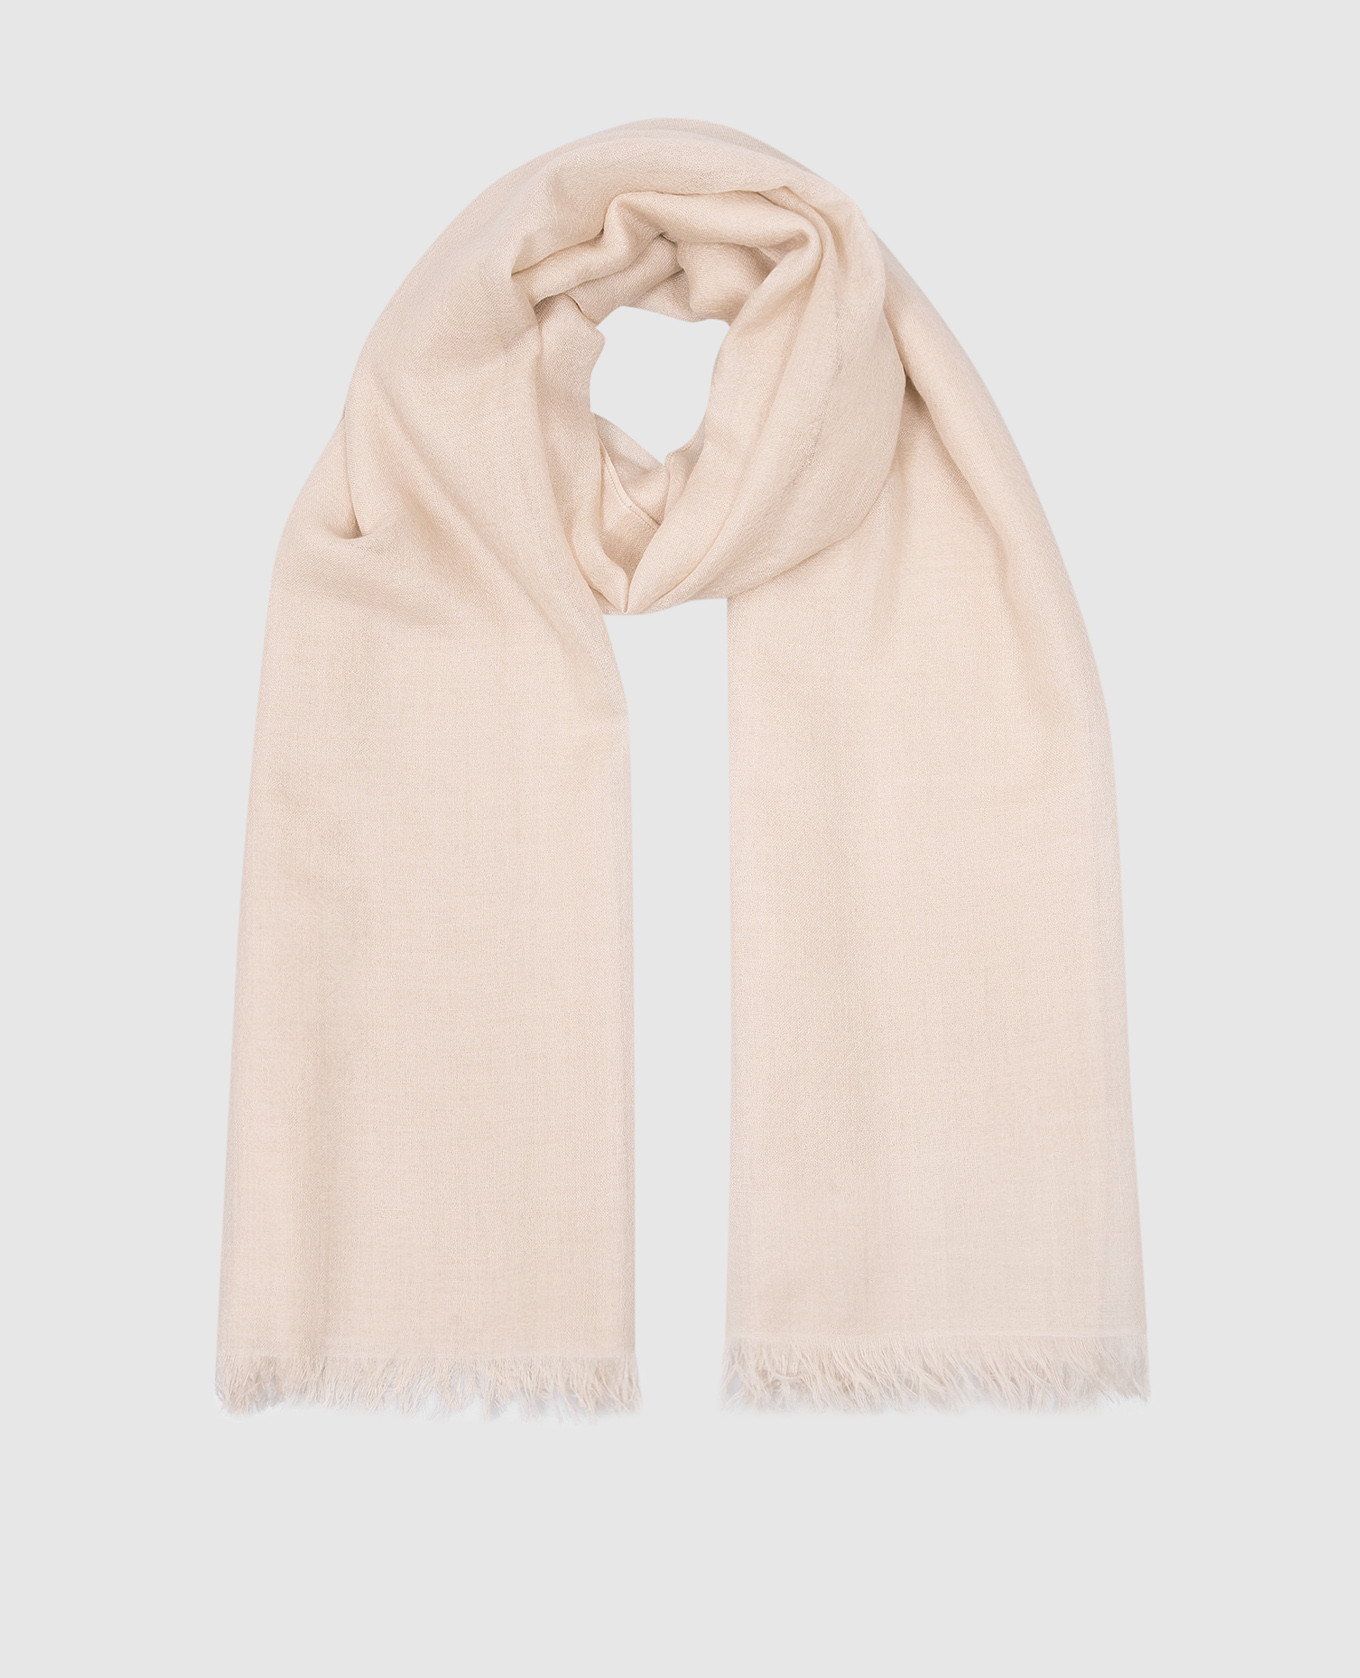 Beige stole made of cashmere and silk